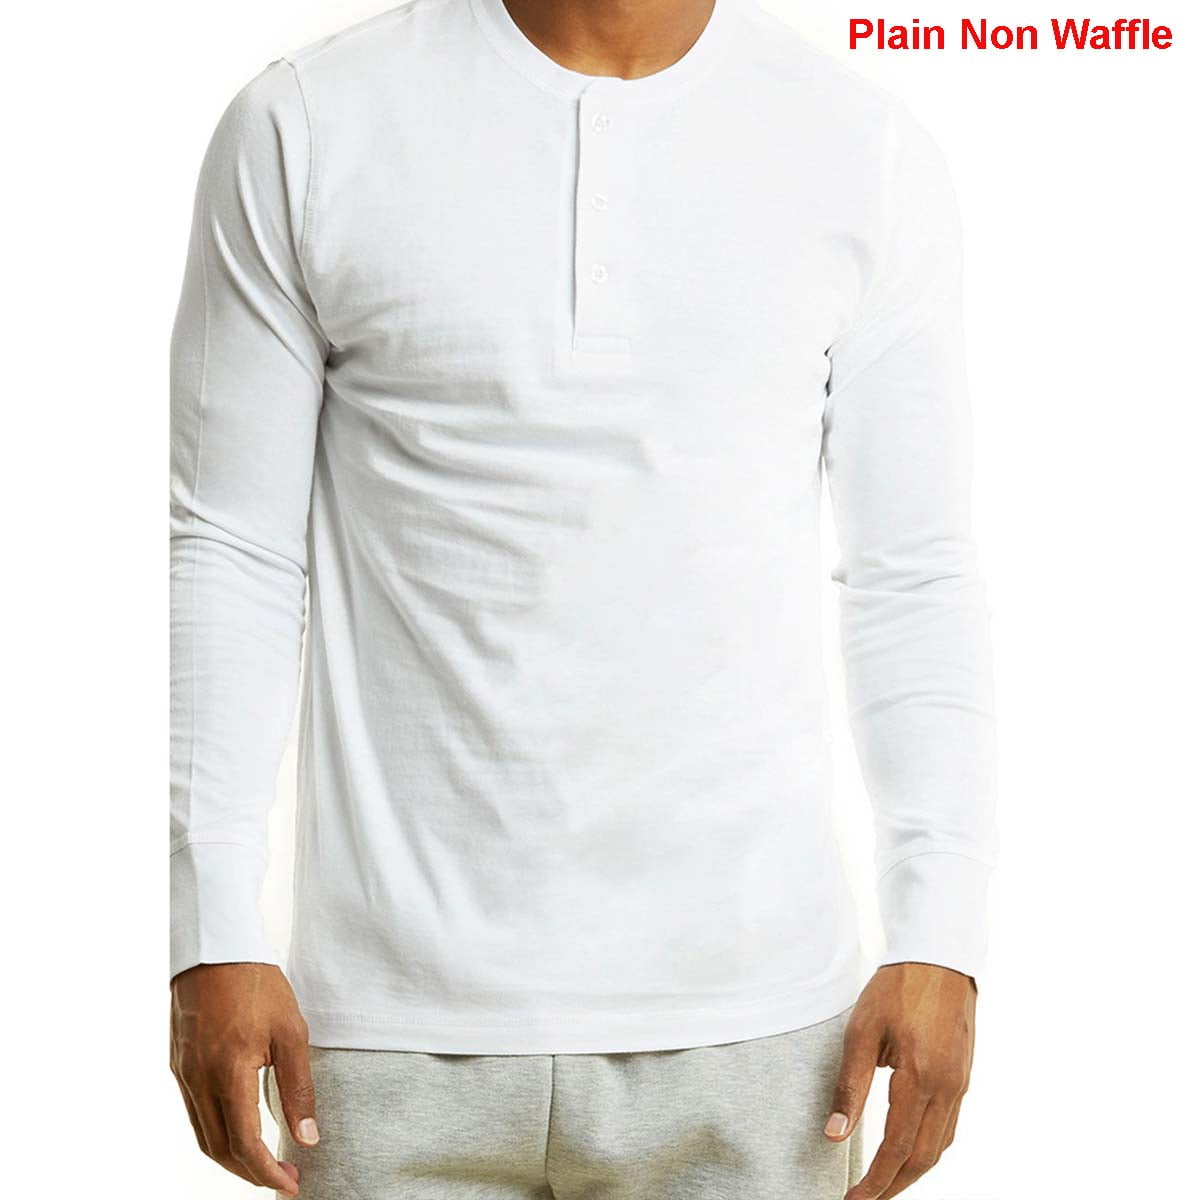 PRO 5 Apparel 100% Cotton Thermal Knit Tops White 3 Pack